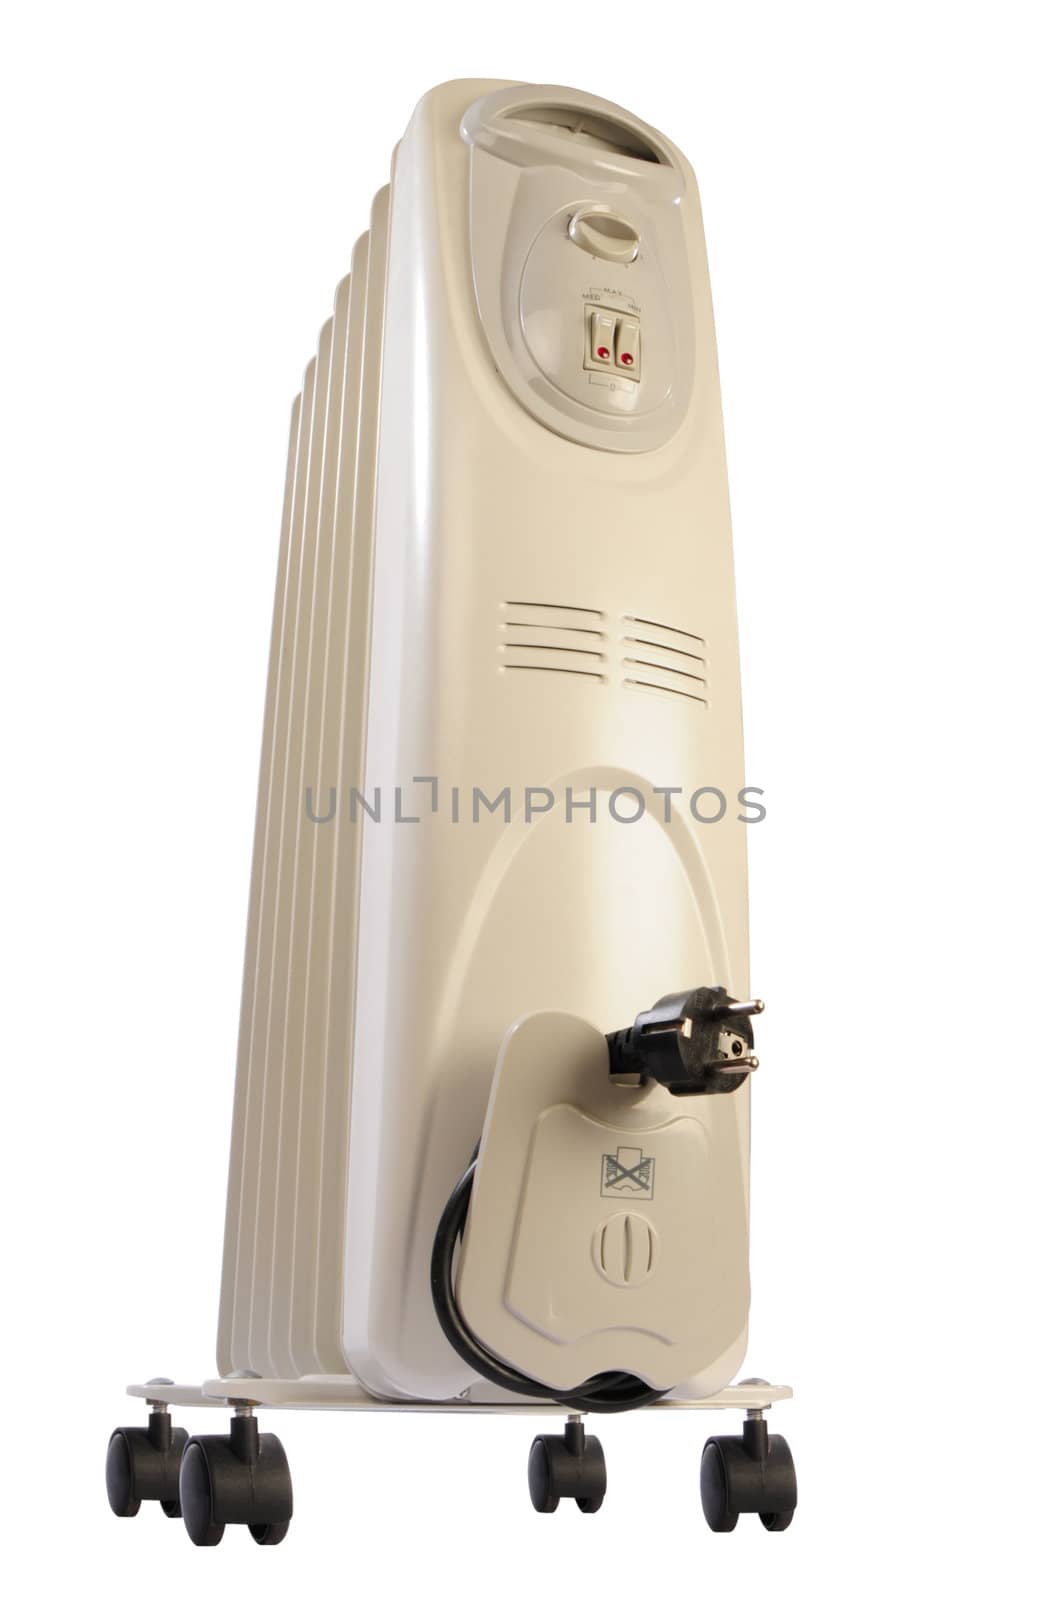 Electric oil heater on white with clipping path